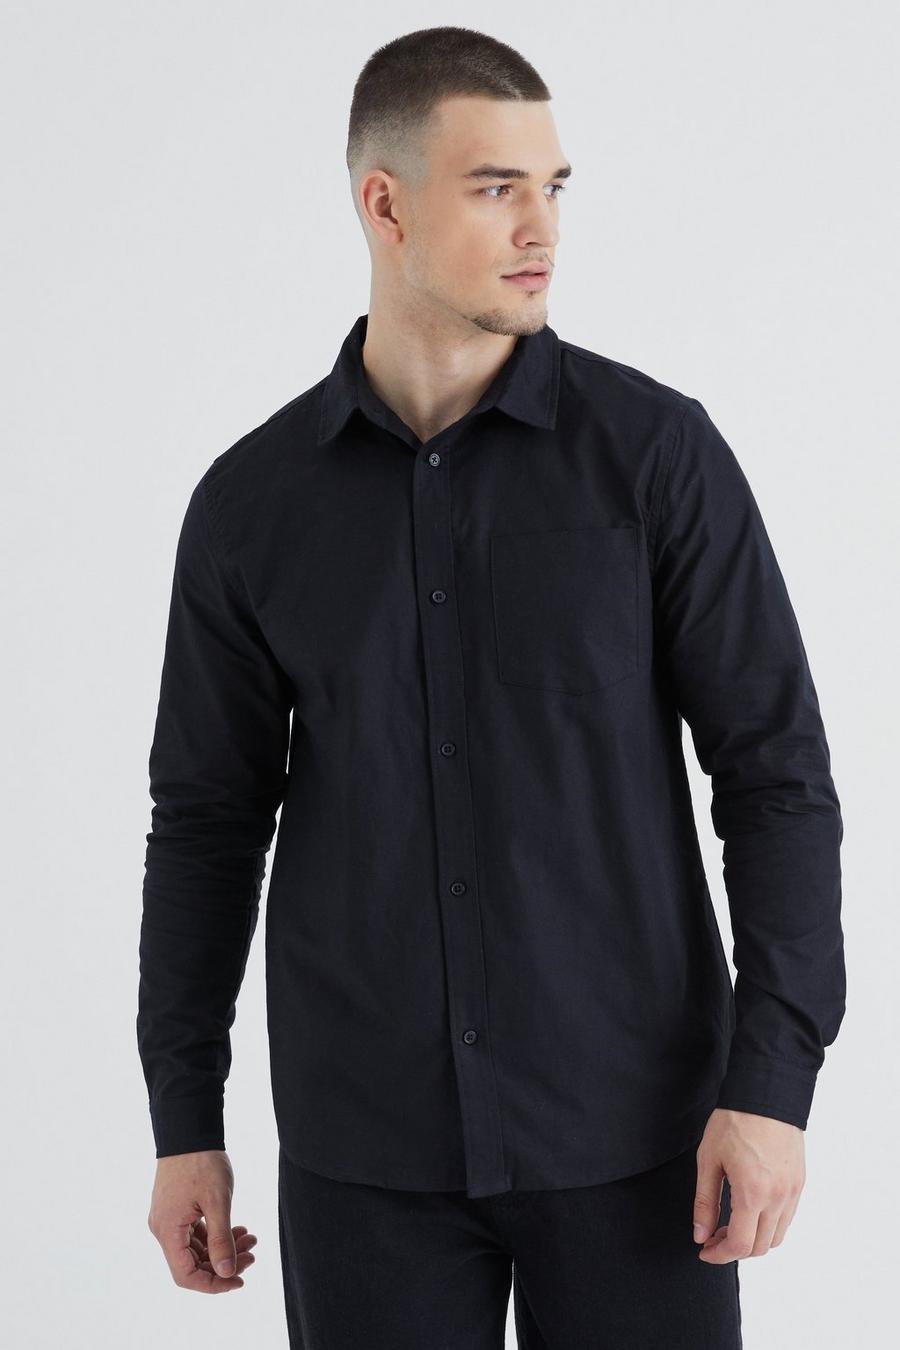 Black Tall Long Sleeve Oxford Shirt image number 1